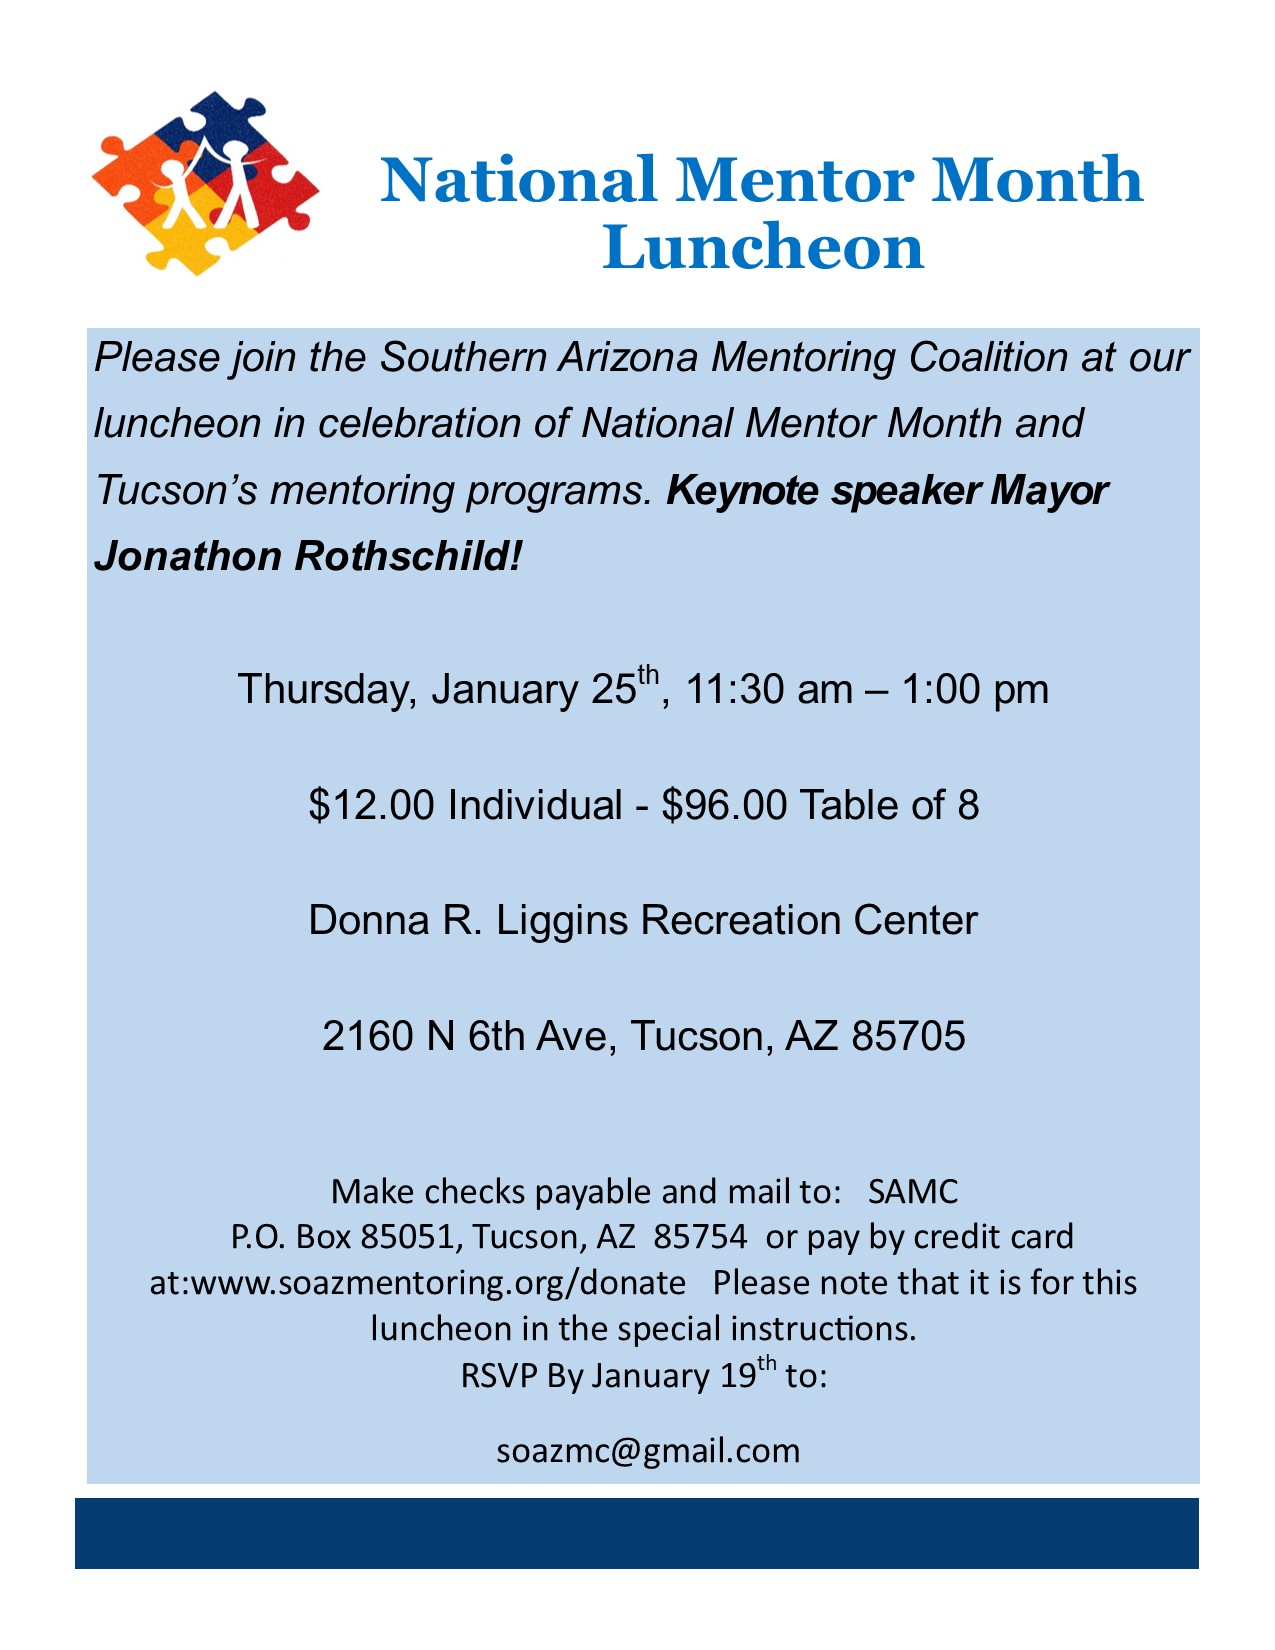 National Mentor Month Luncheon